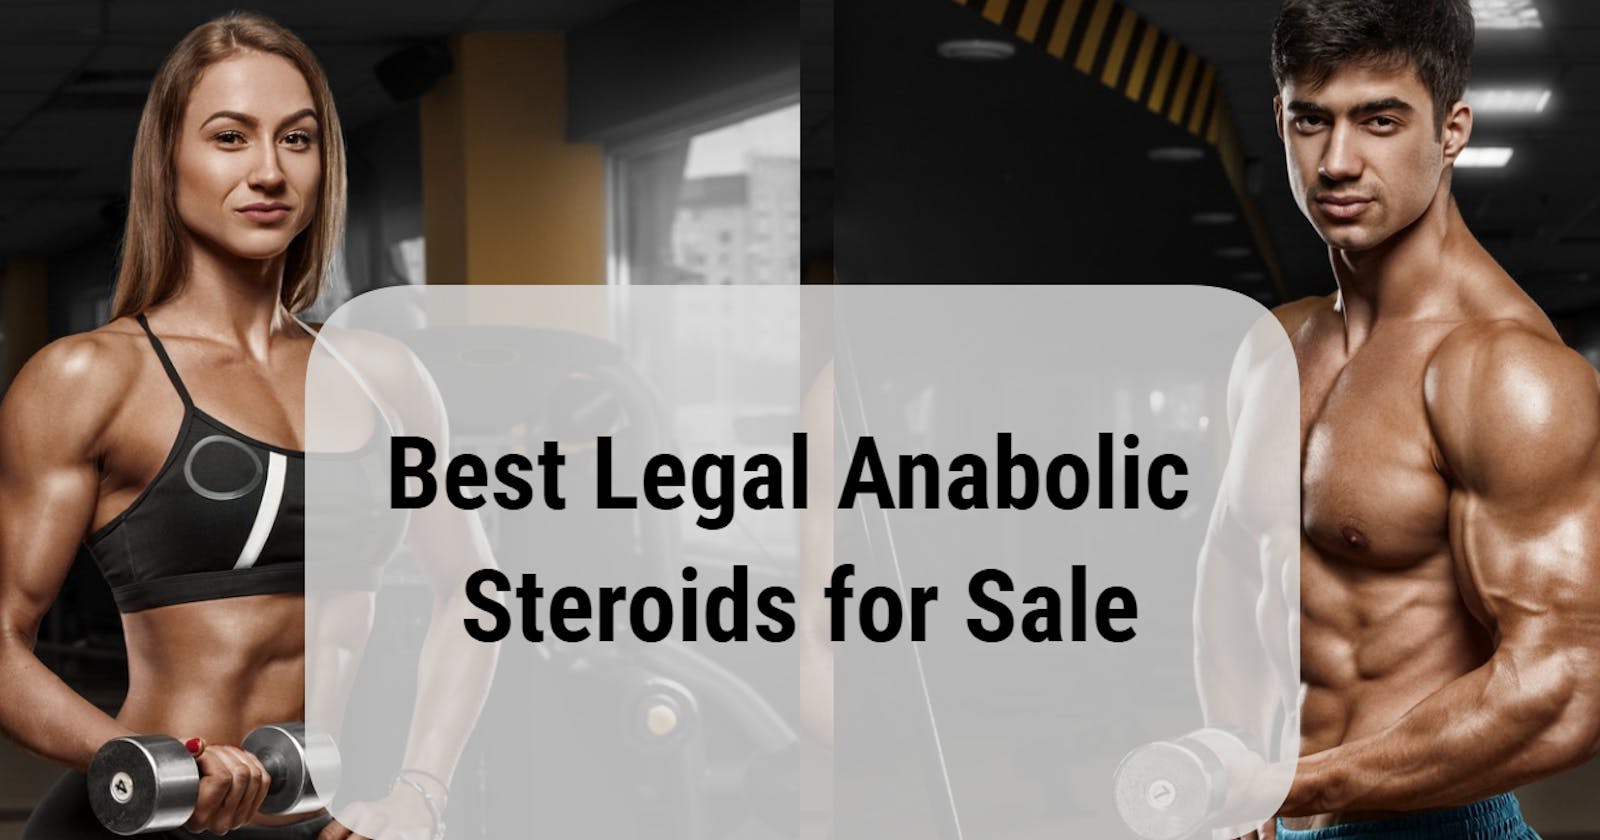 Anabolic Steroids Reviews - Their Consequences for The Muscles Meta-Examination on Subjective!